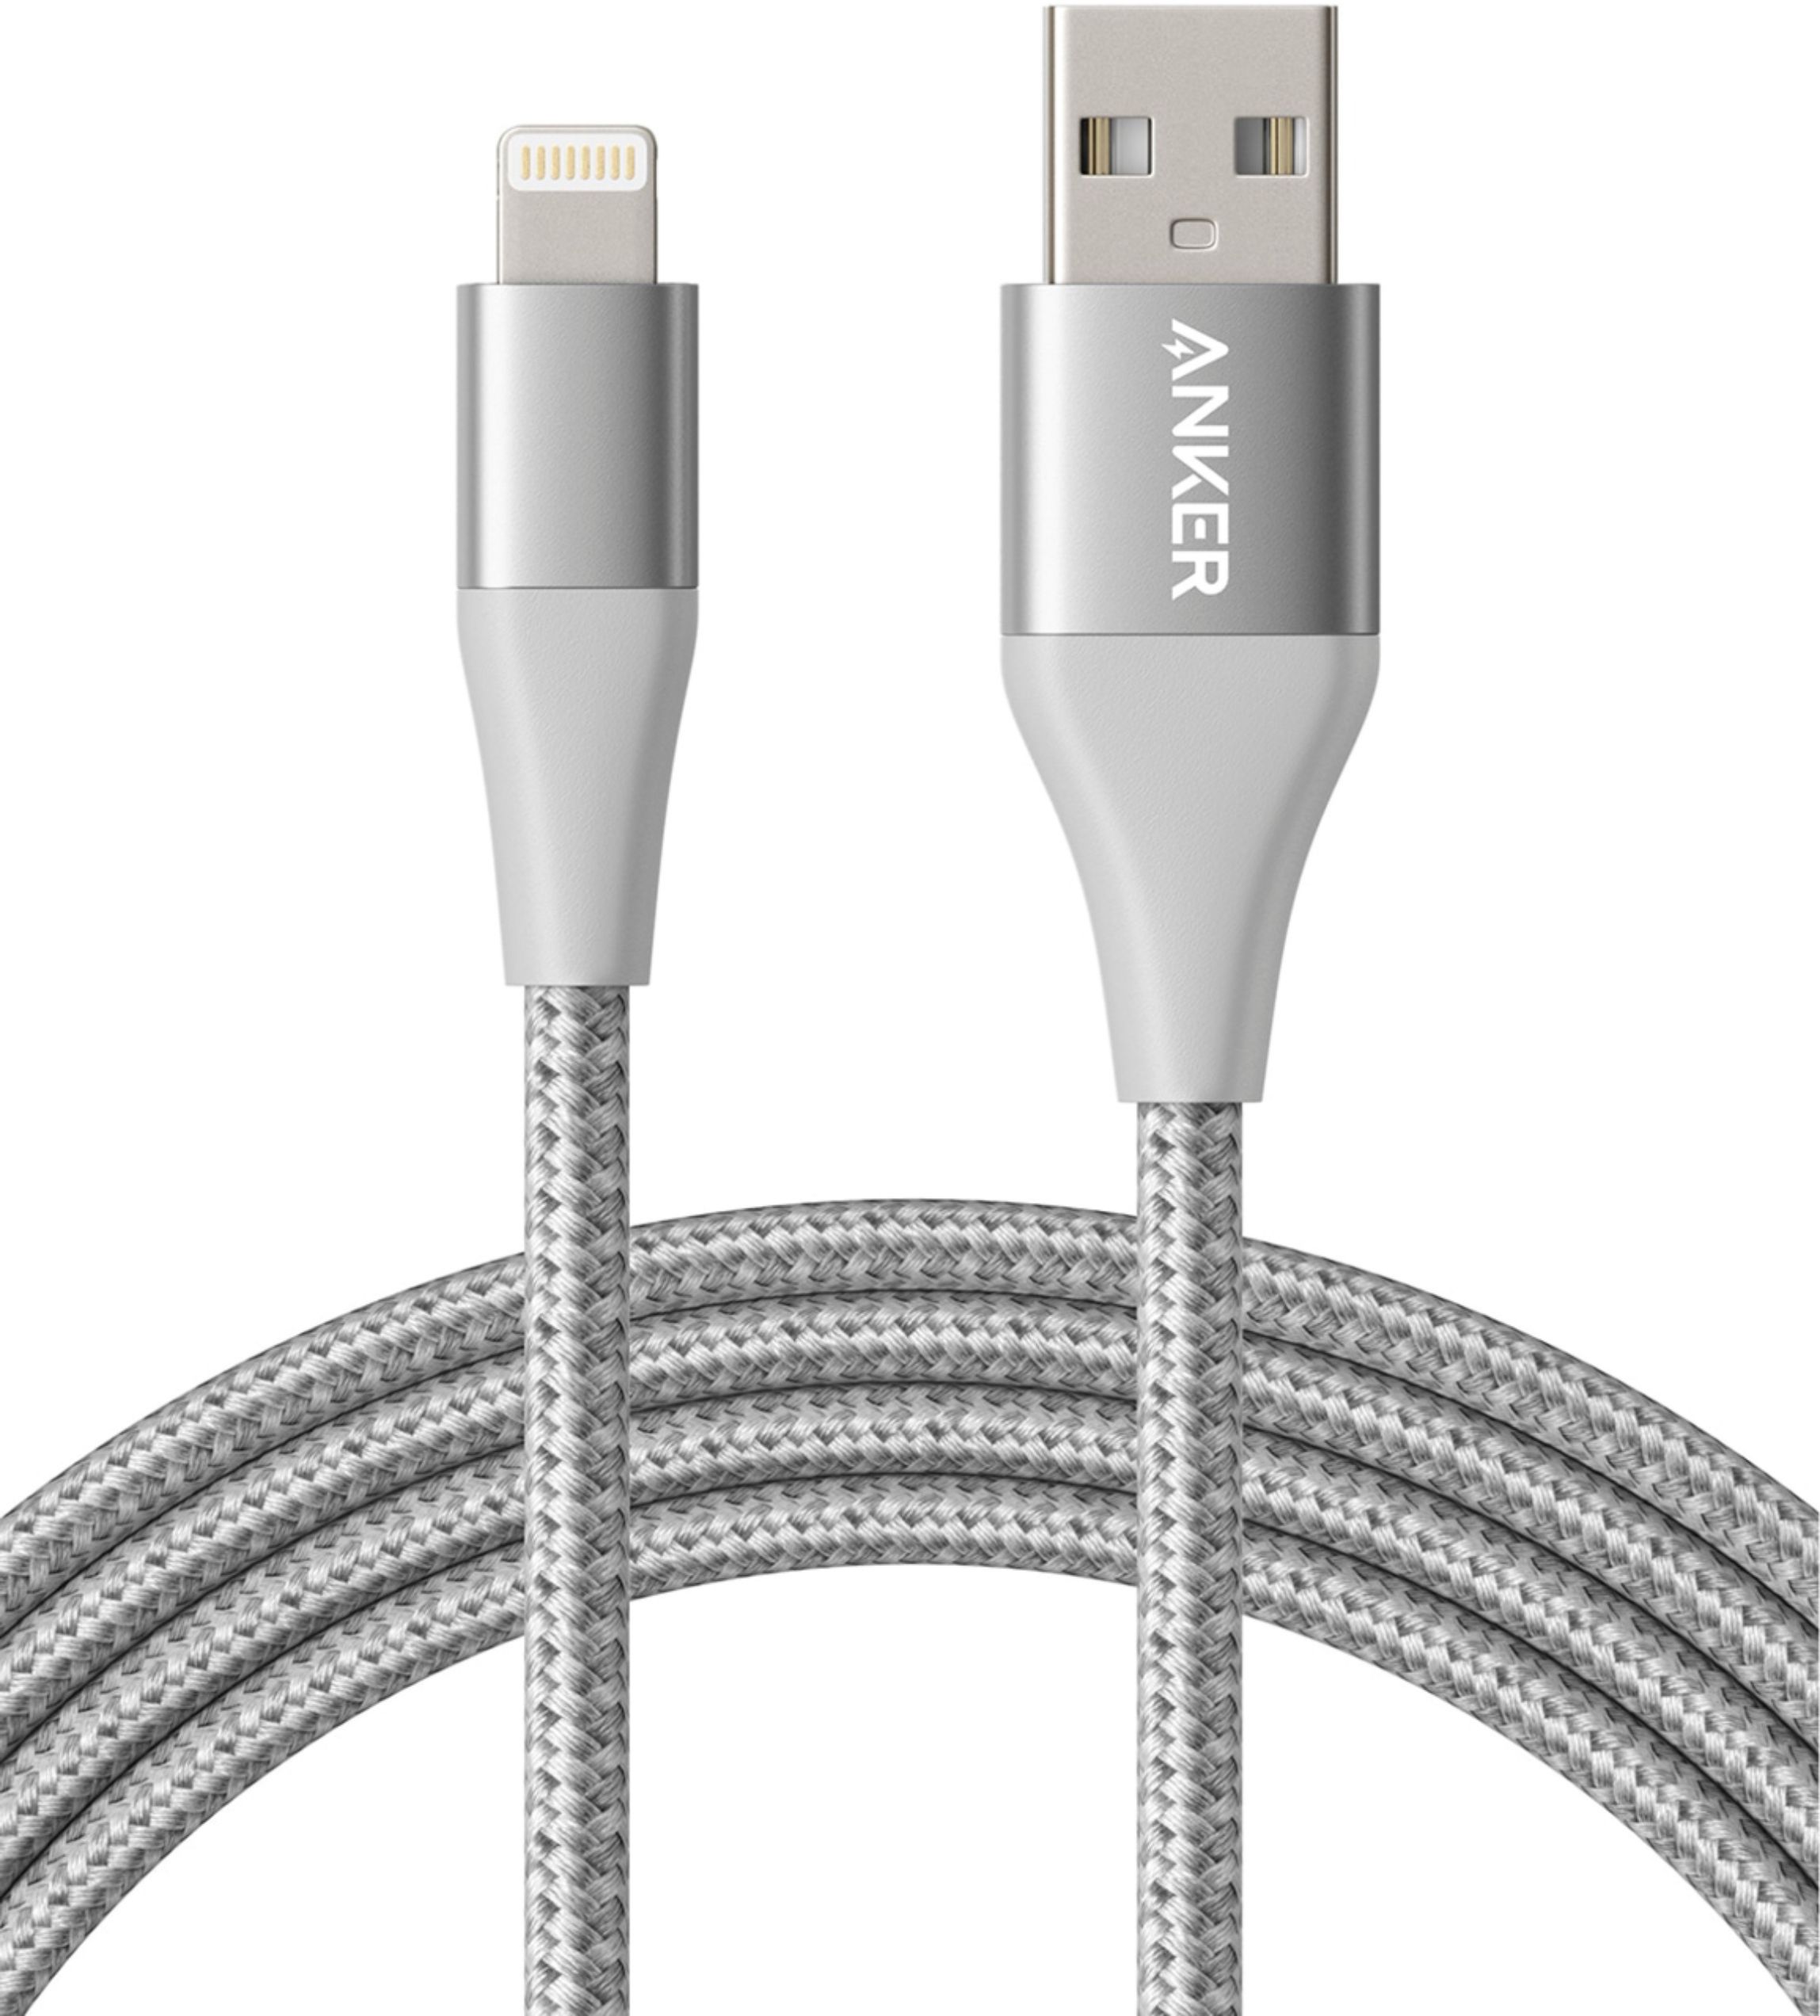 Anker Powerline+ USB-A to Lightning Cable 6-ft Silver A8453H43-1 - Best Buy